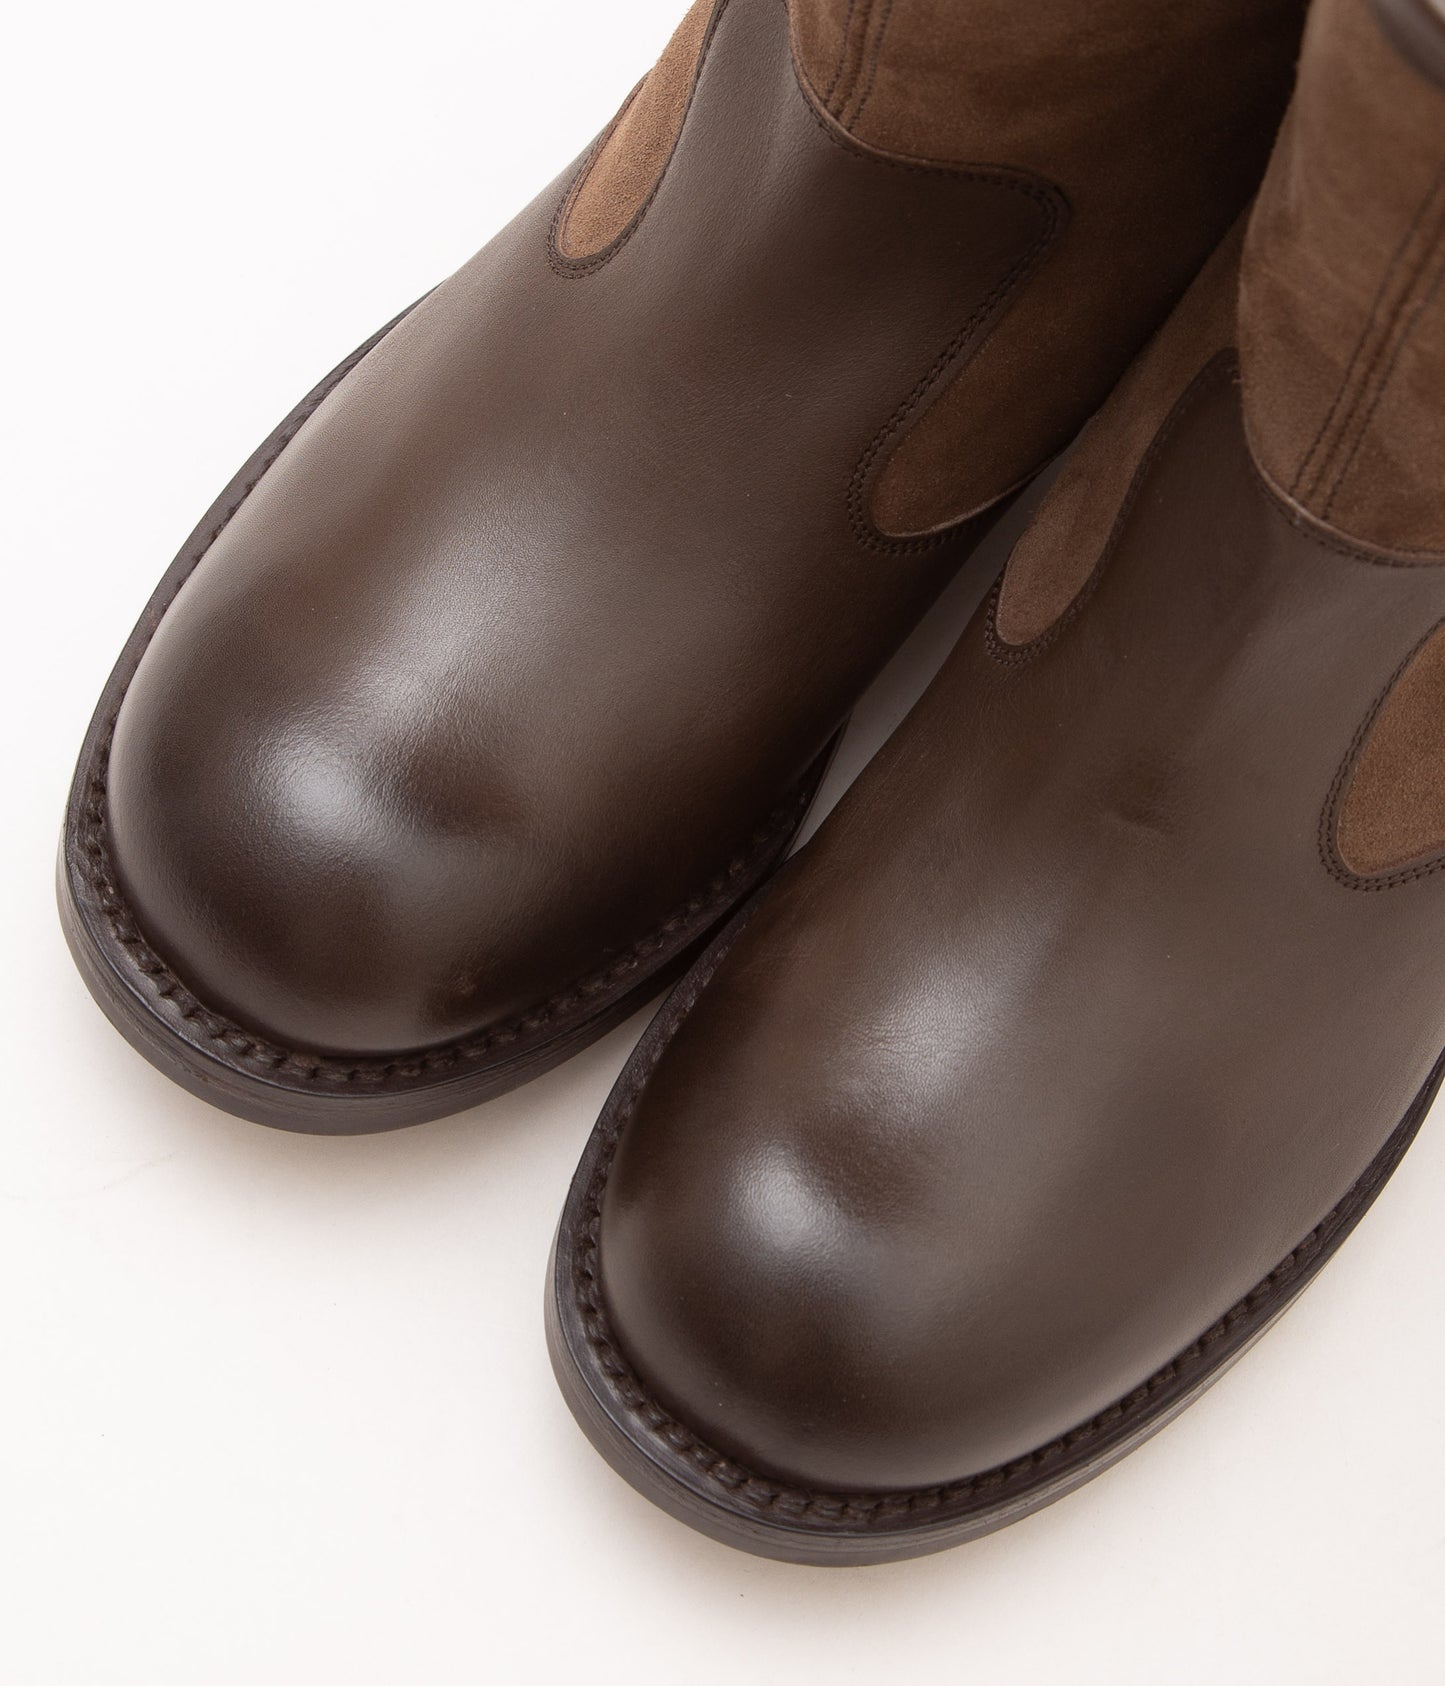 QUILP BY TRICKER'S×MAIDENS SHOP "M7400 BOOTS"(DK BROWN MULTI)